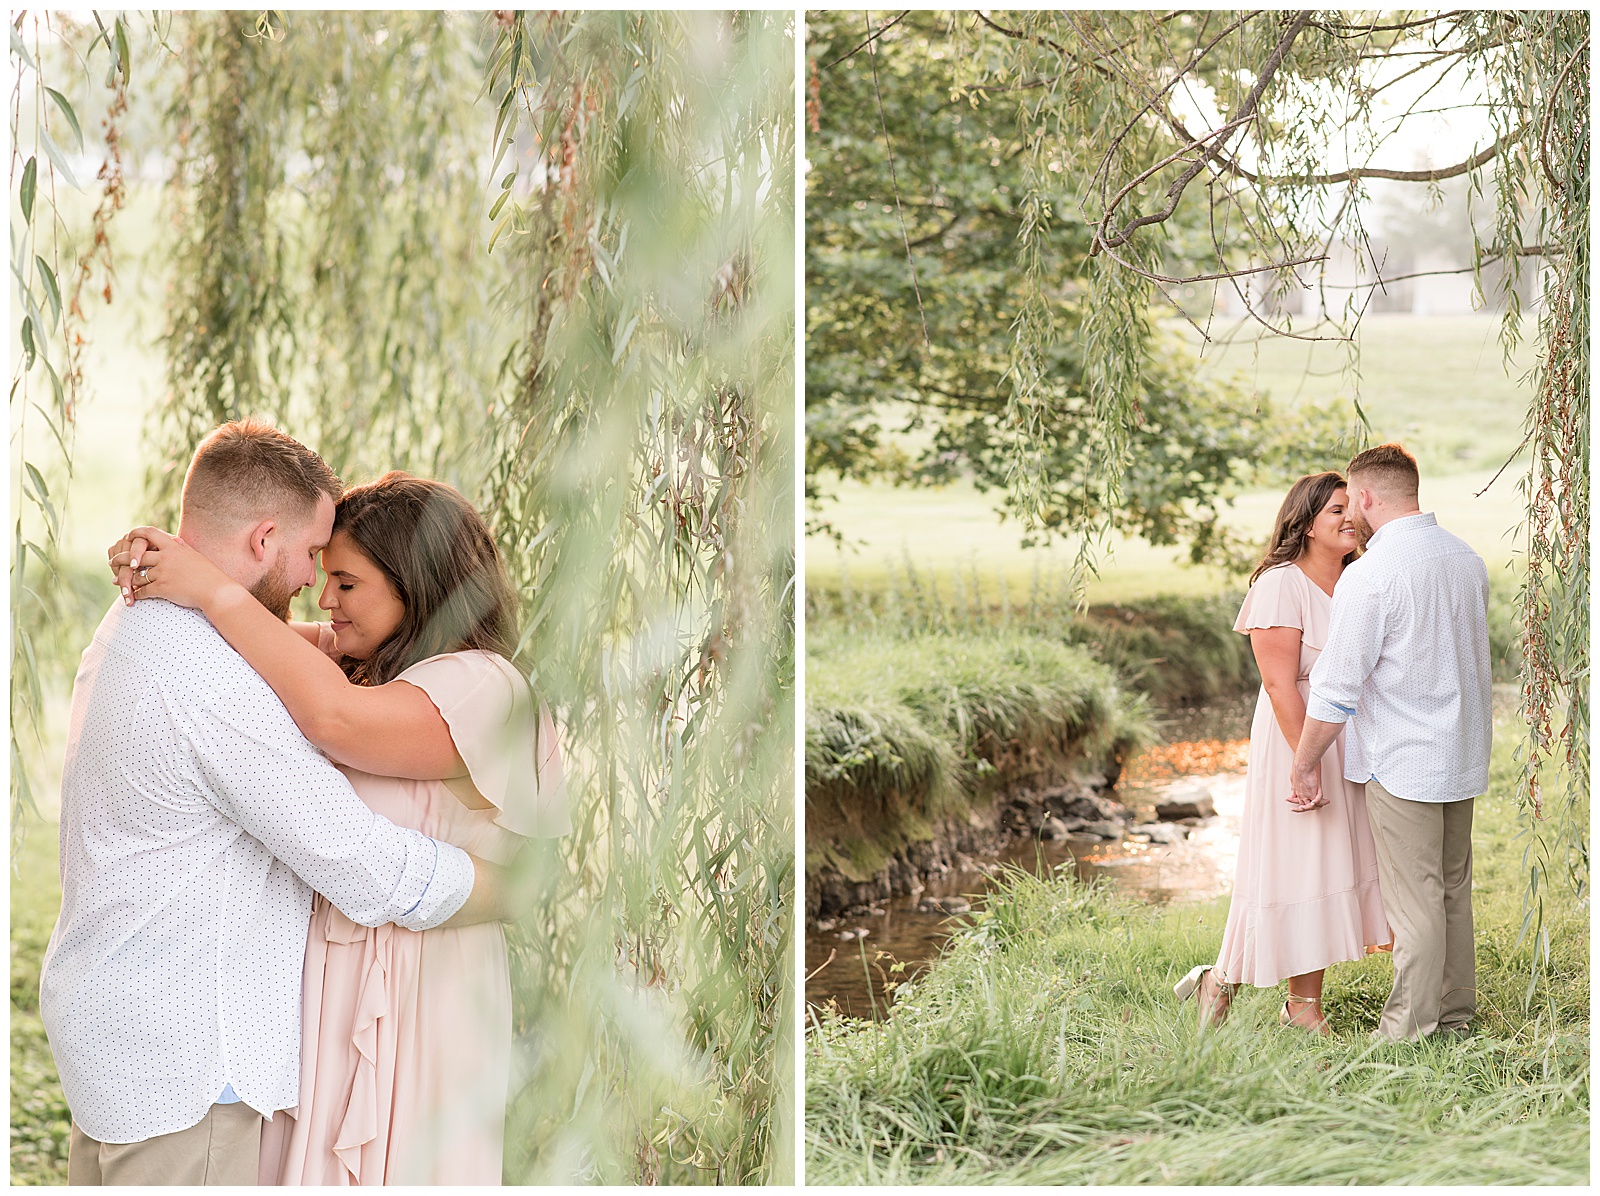 couple standing close with arms wrapped around each other under willow tree in grassy lawn on summer evening